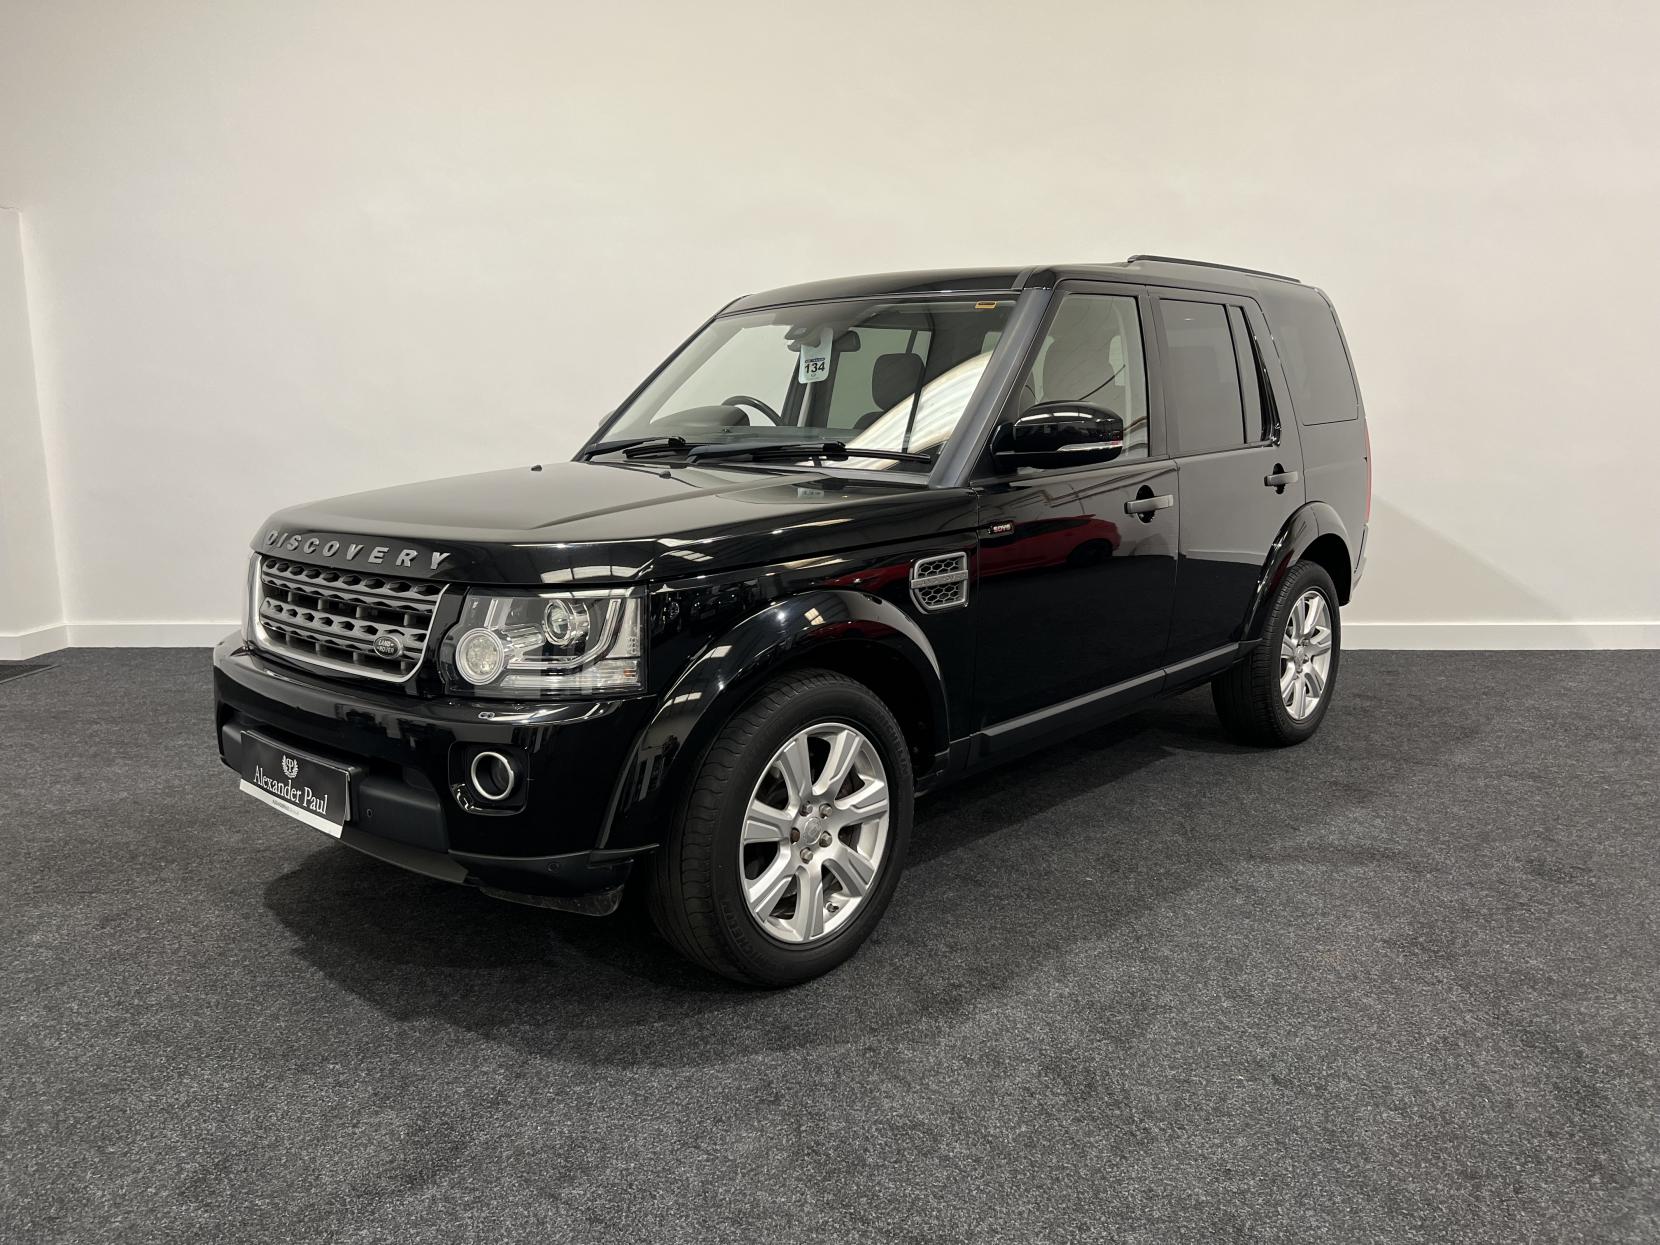 Land Rover Discovery 4 3.0 SD V6 XS SUV 5dr Diesel Auto 4WD Euro 5 (s/s) (255 bhp)